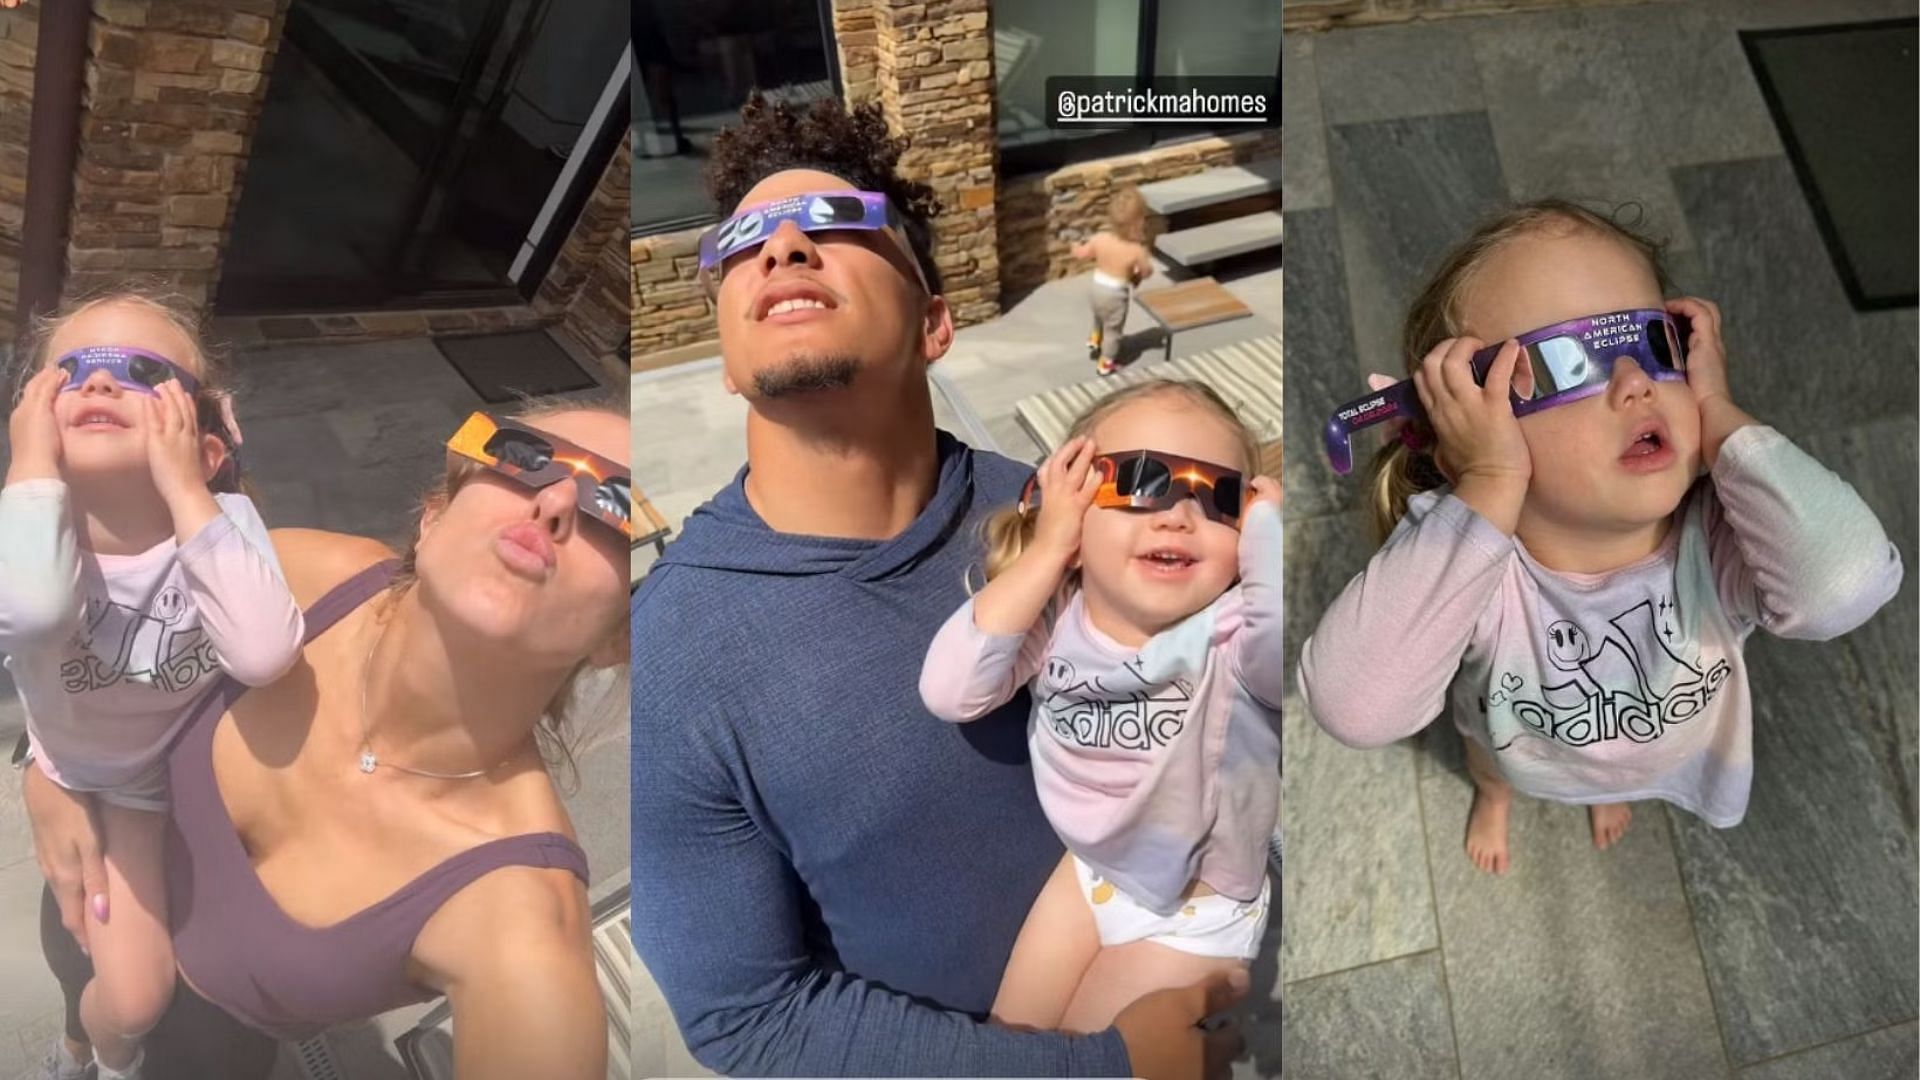 Patrick Mahomes and family enjoy looking at the solar eclipse together (Image credit: @brittanylynne IG)